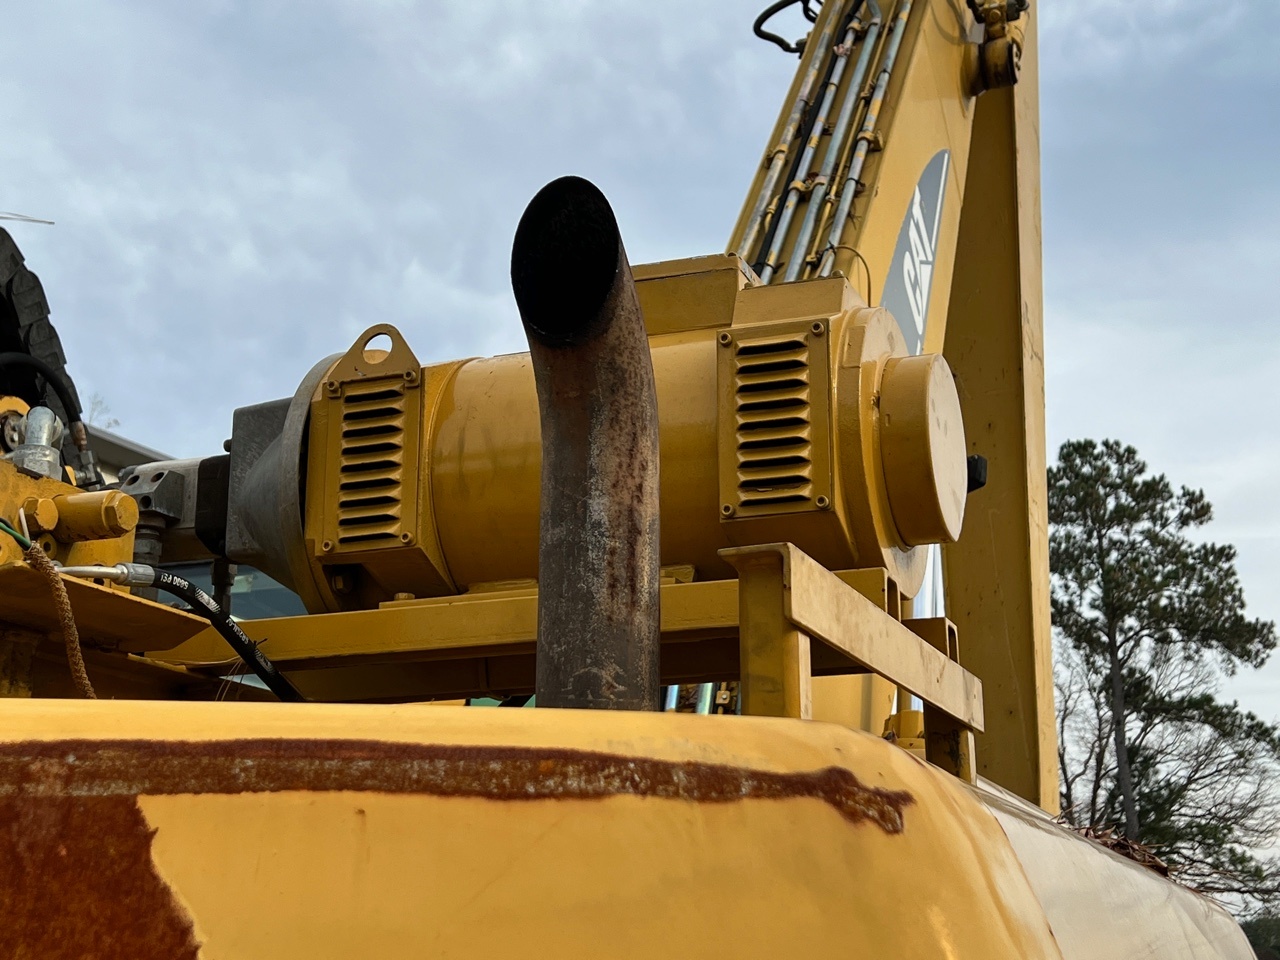 Used 2003 Caterpillar M322C MH For Sale